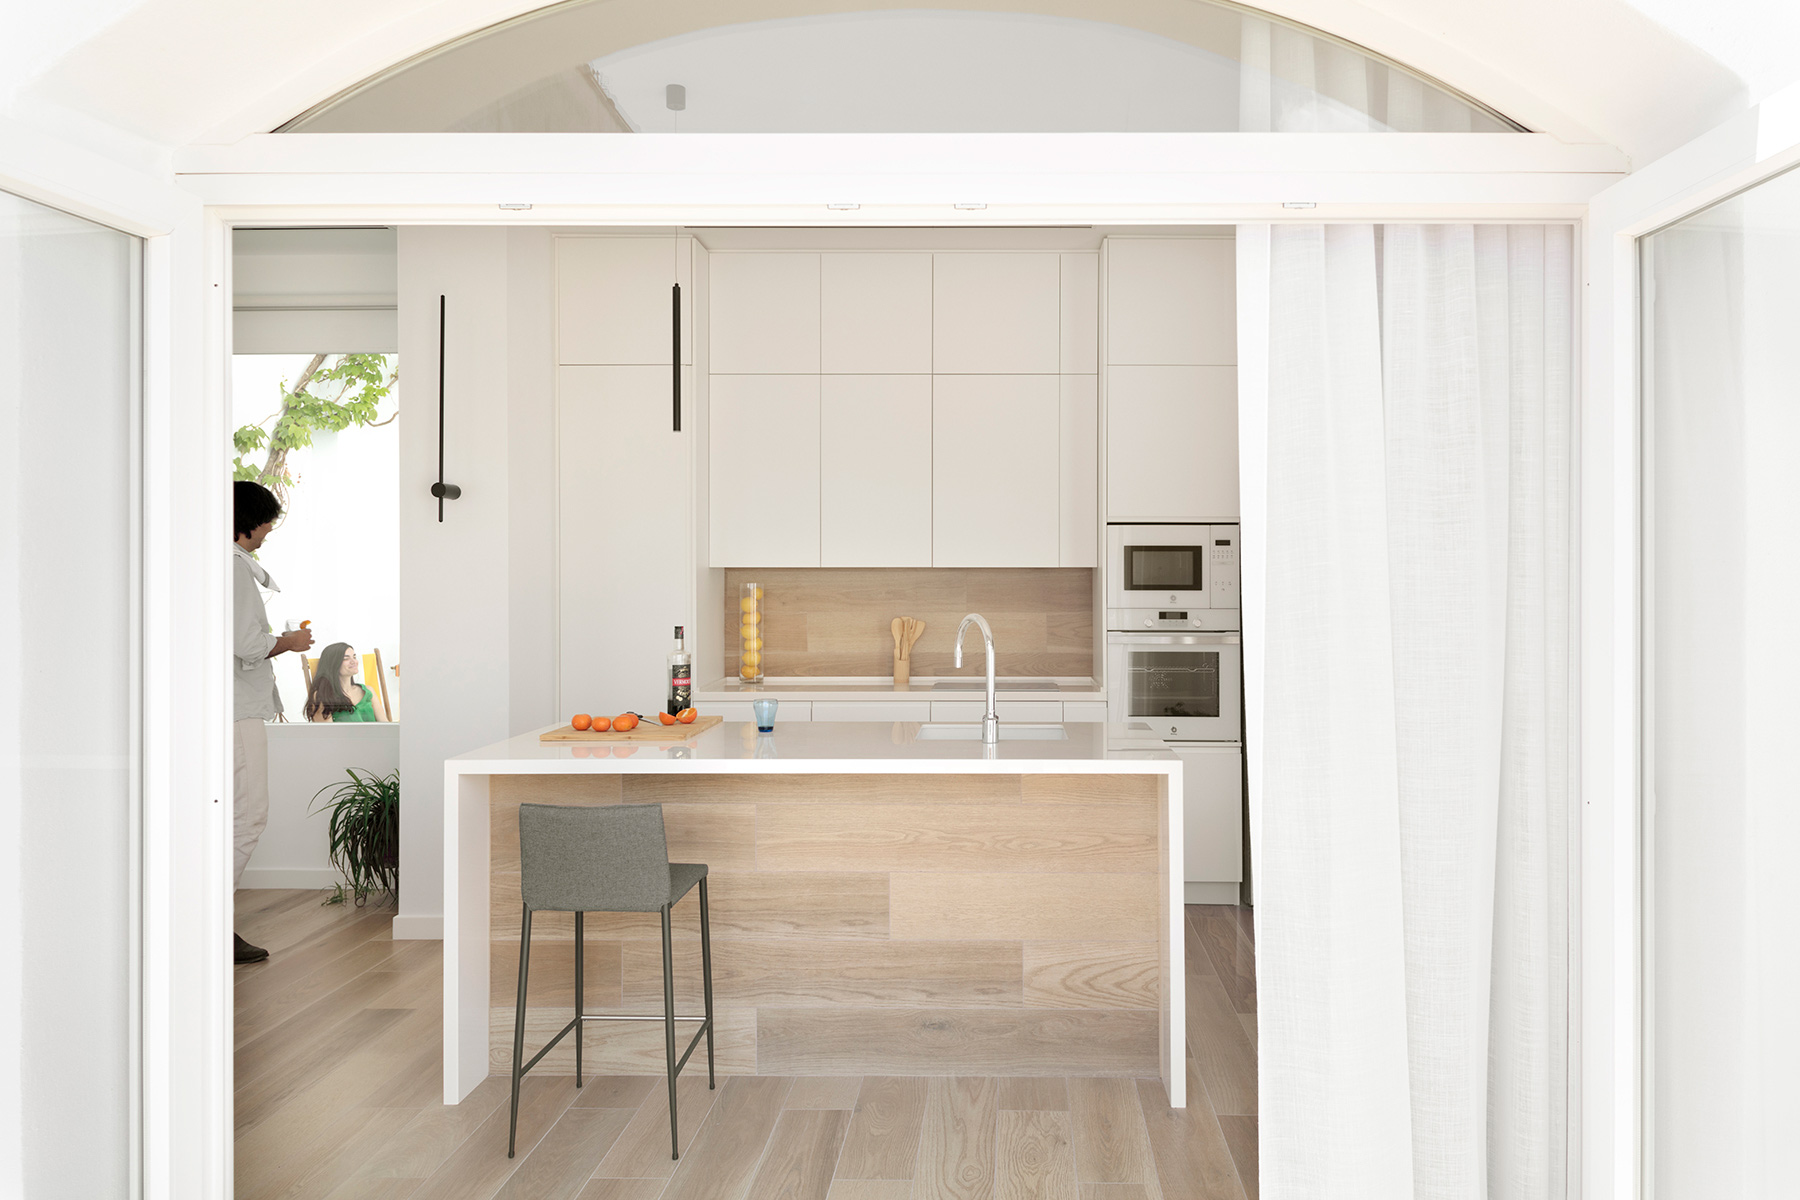 Image of Entrepatios 5 in Spaciousness, functionality and Dekton for the kitchen of this house in Murcia - Cosentino